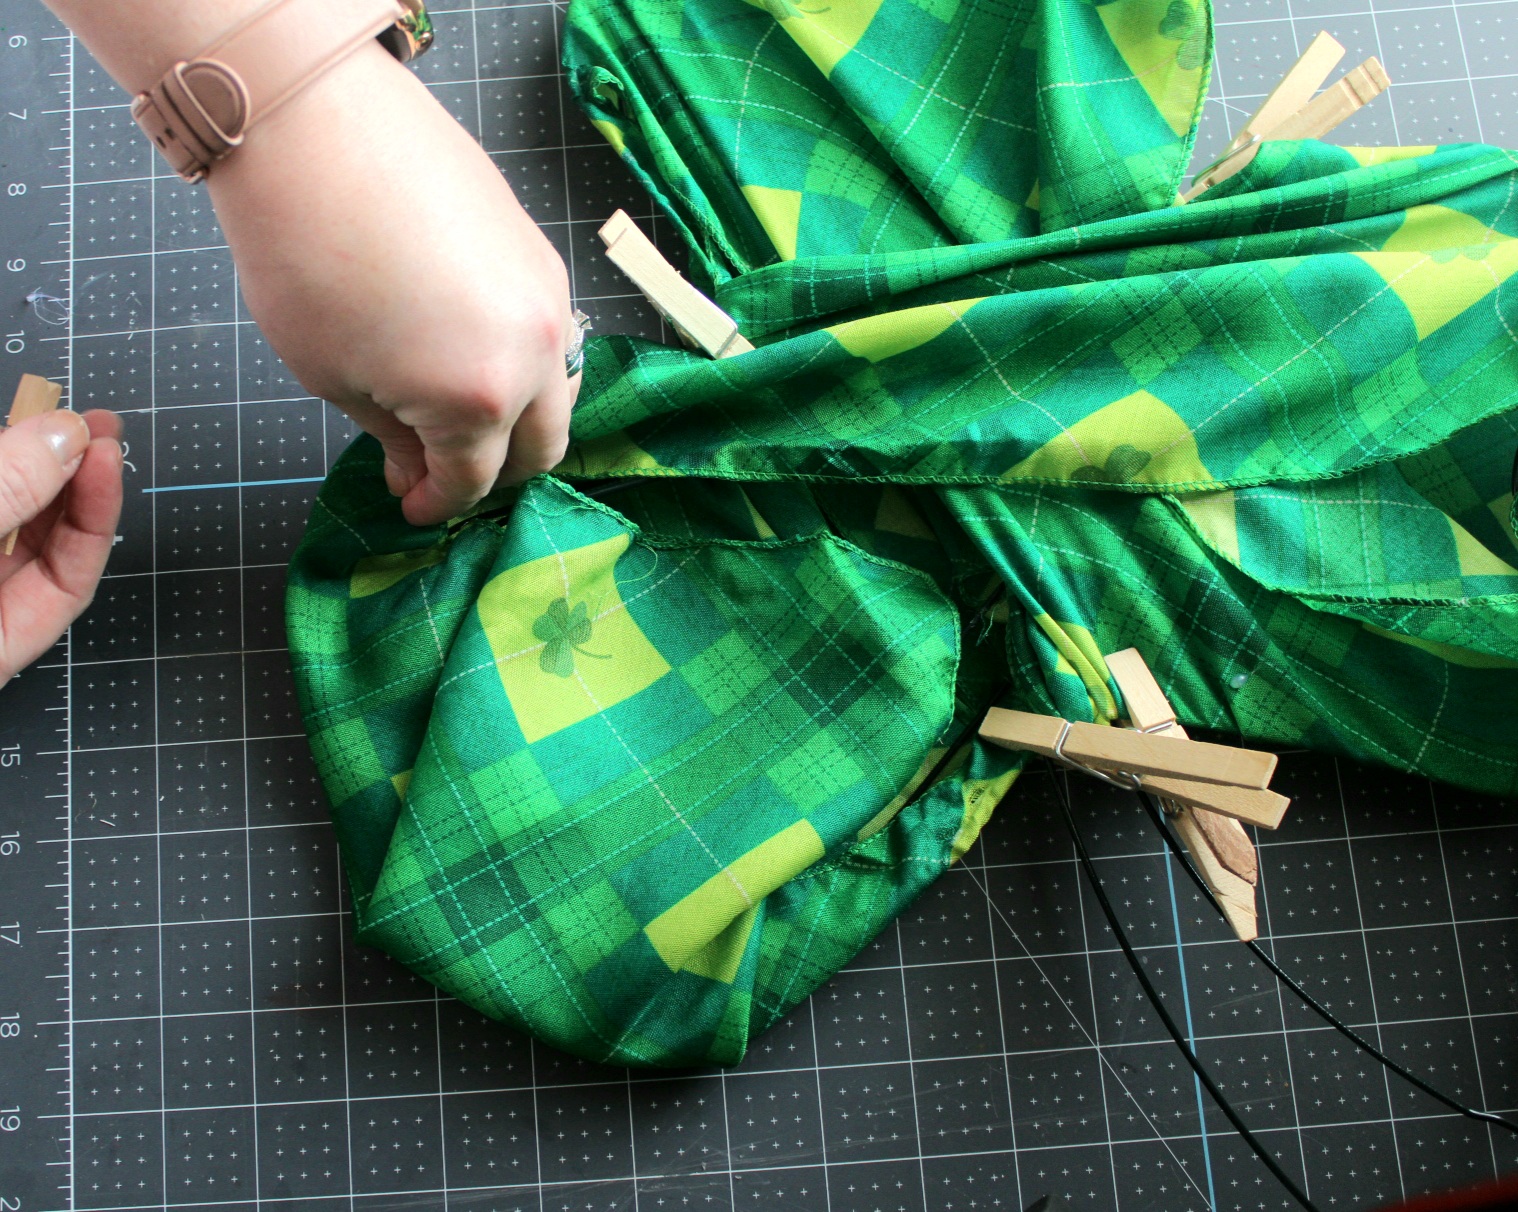 Pinning the scarf in place on the right leaf with clothespins.